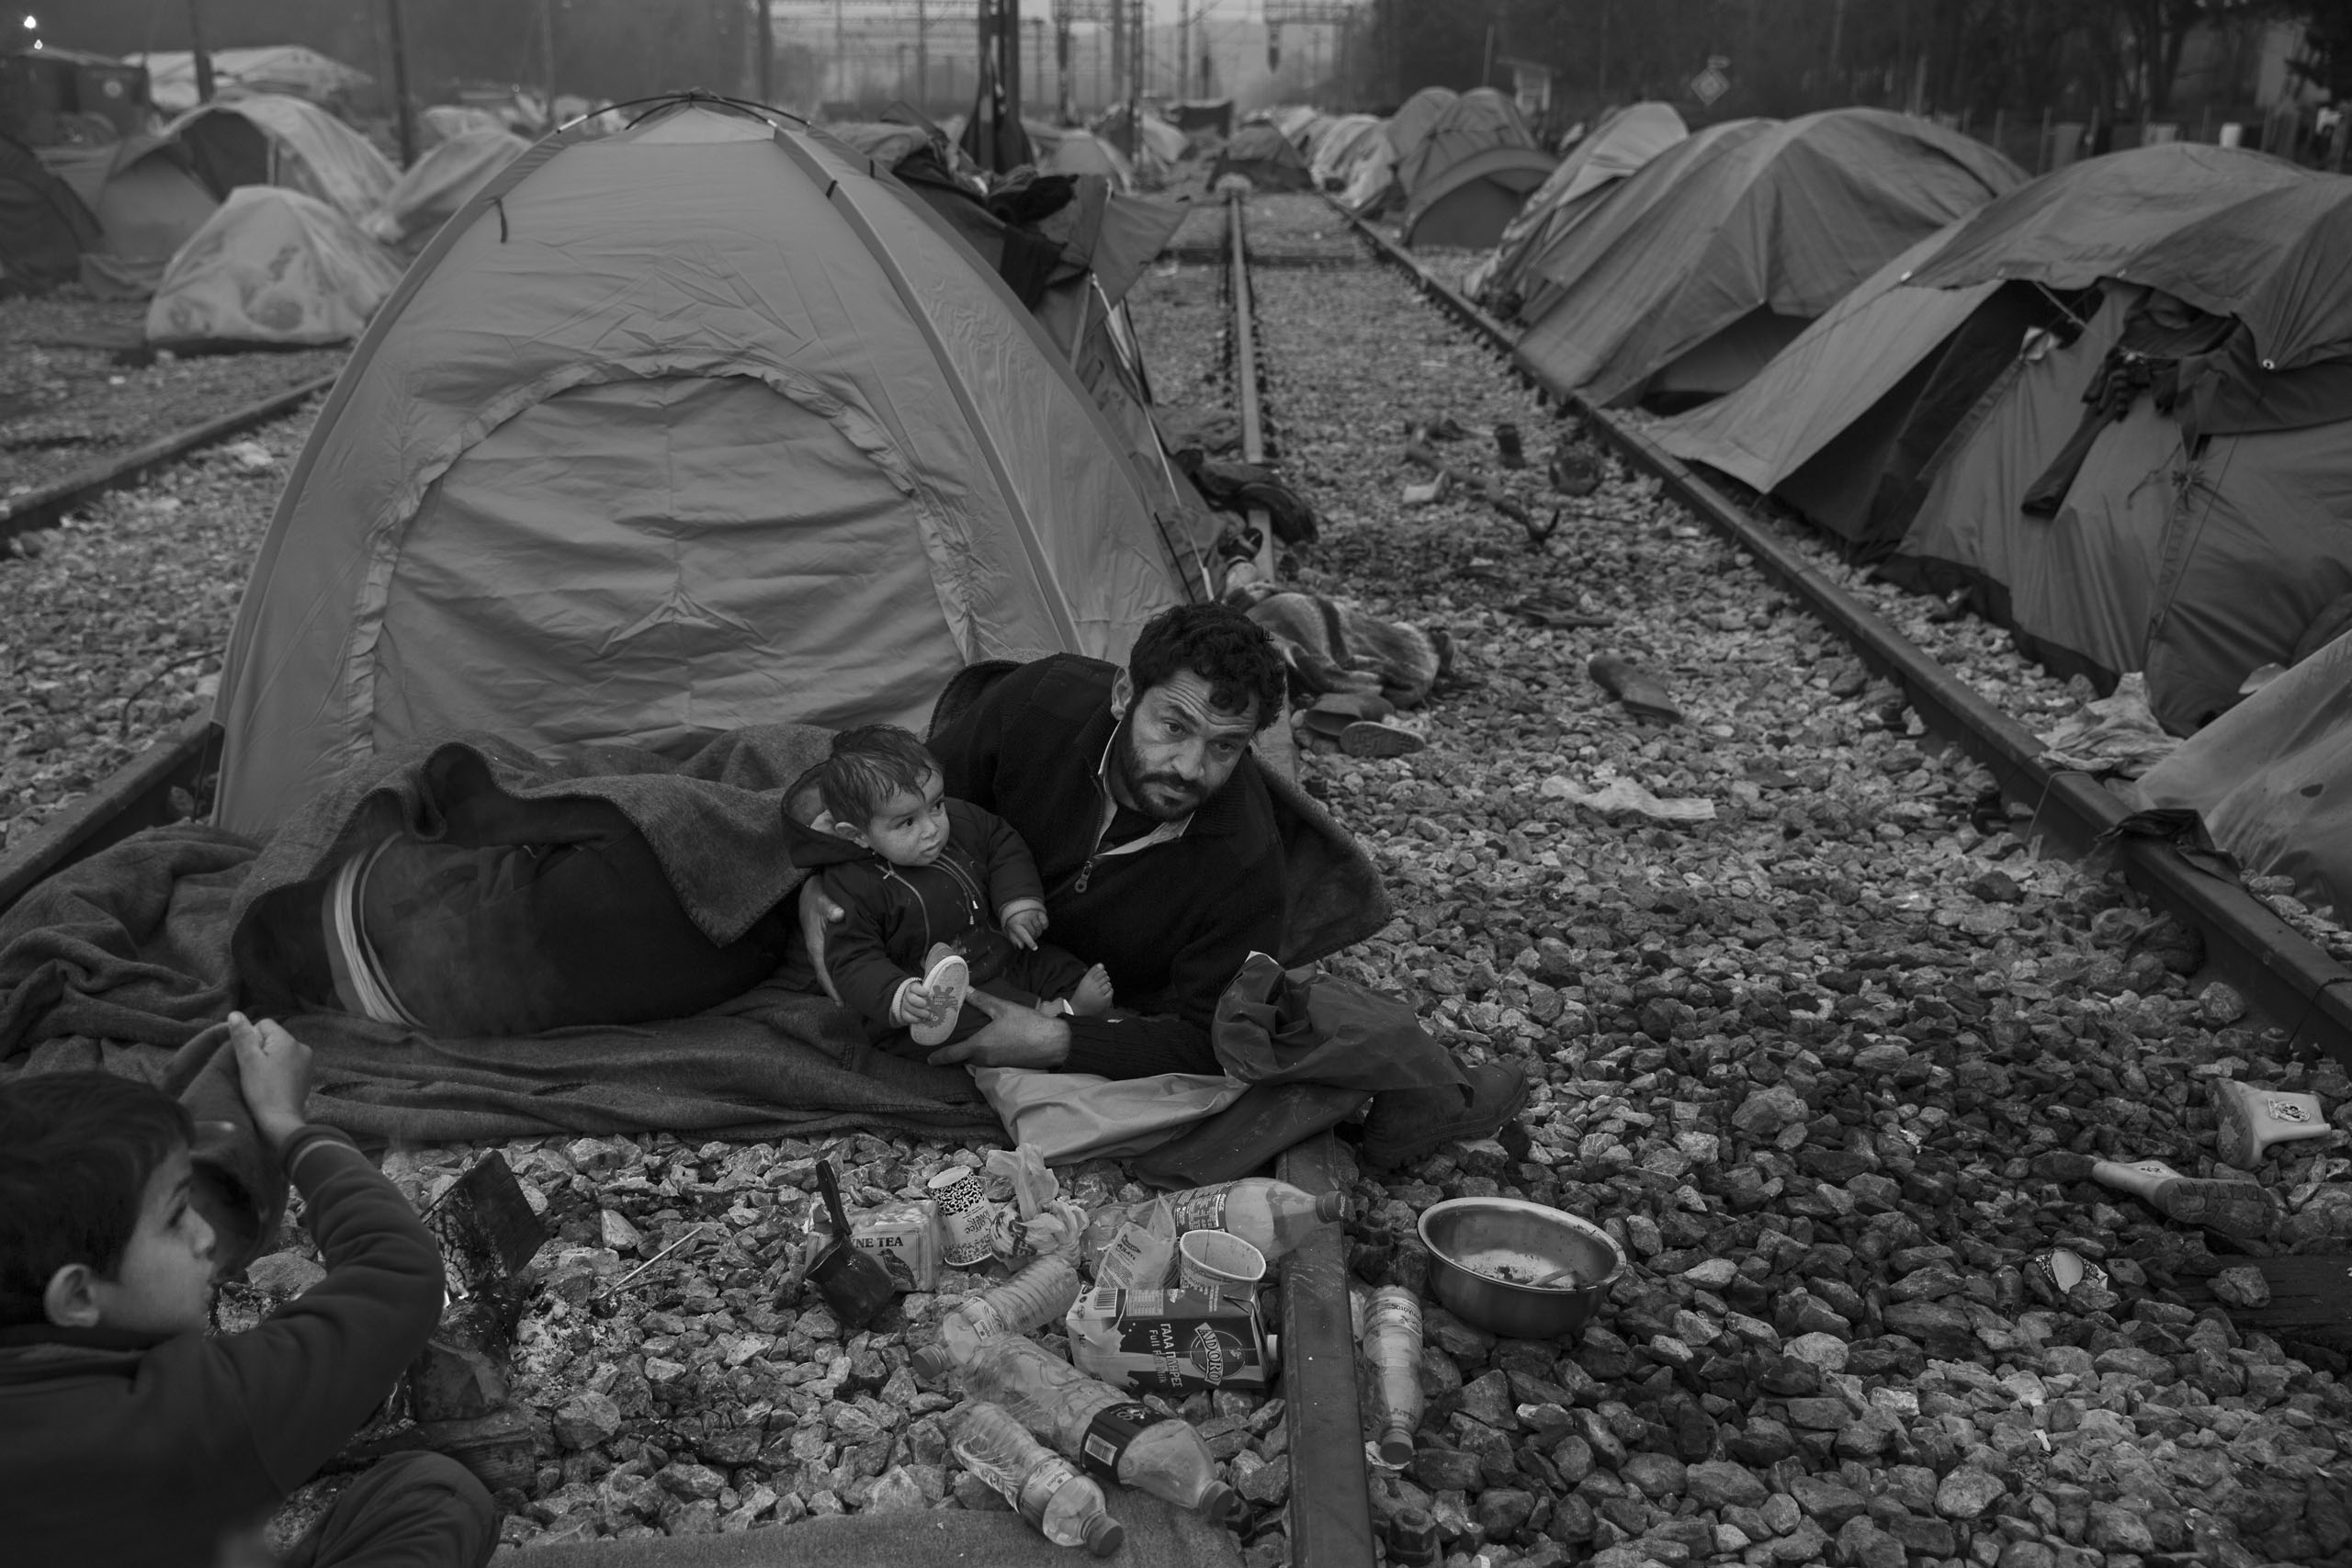 Refugees live in  tents along the railroad tracks at a camp  near Idomeni, Greece at the border with Macedonia, where thousands are stranded in the rain, mud and the cold with insufficient food and medical care, March 17, 2016.